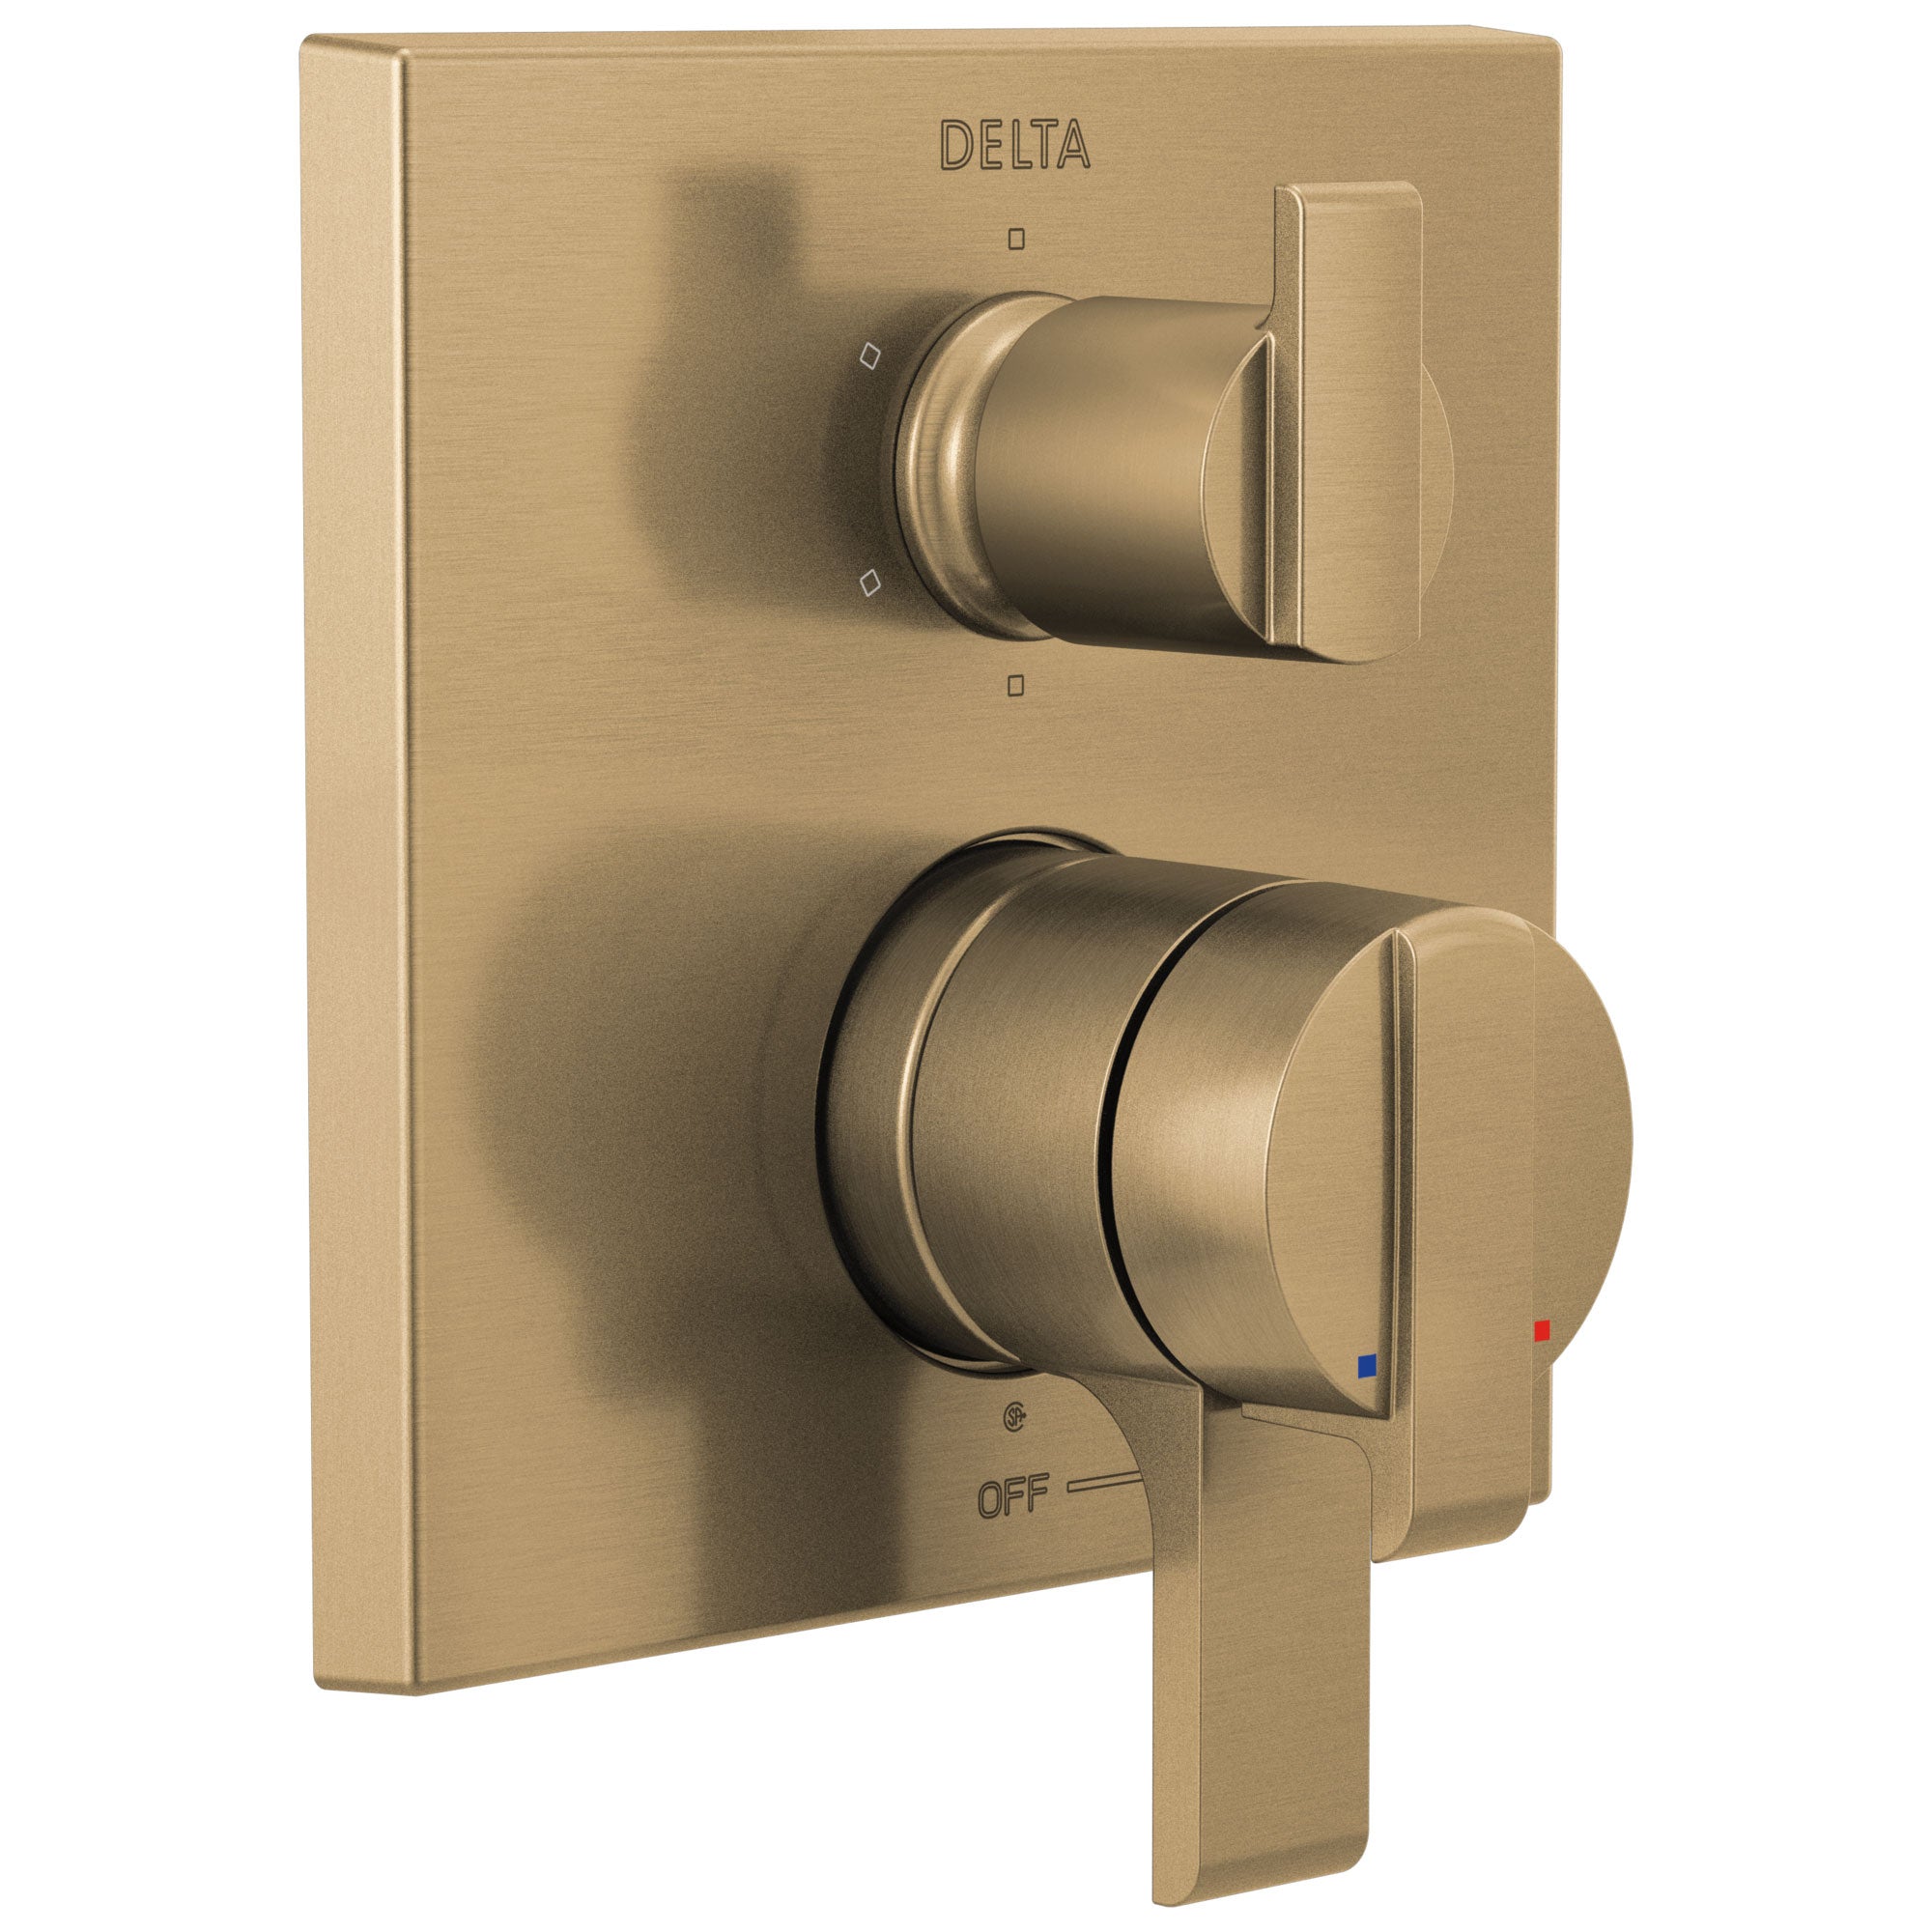 Delta Ara Champagne Bronze Finish Angular Modern Monitor 17 Series Shower Control Trim Kit with 6-Setting Integrated Diverter (Requires Valve) DT27967CZ